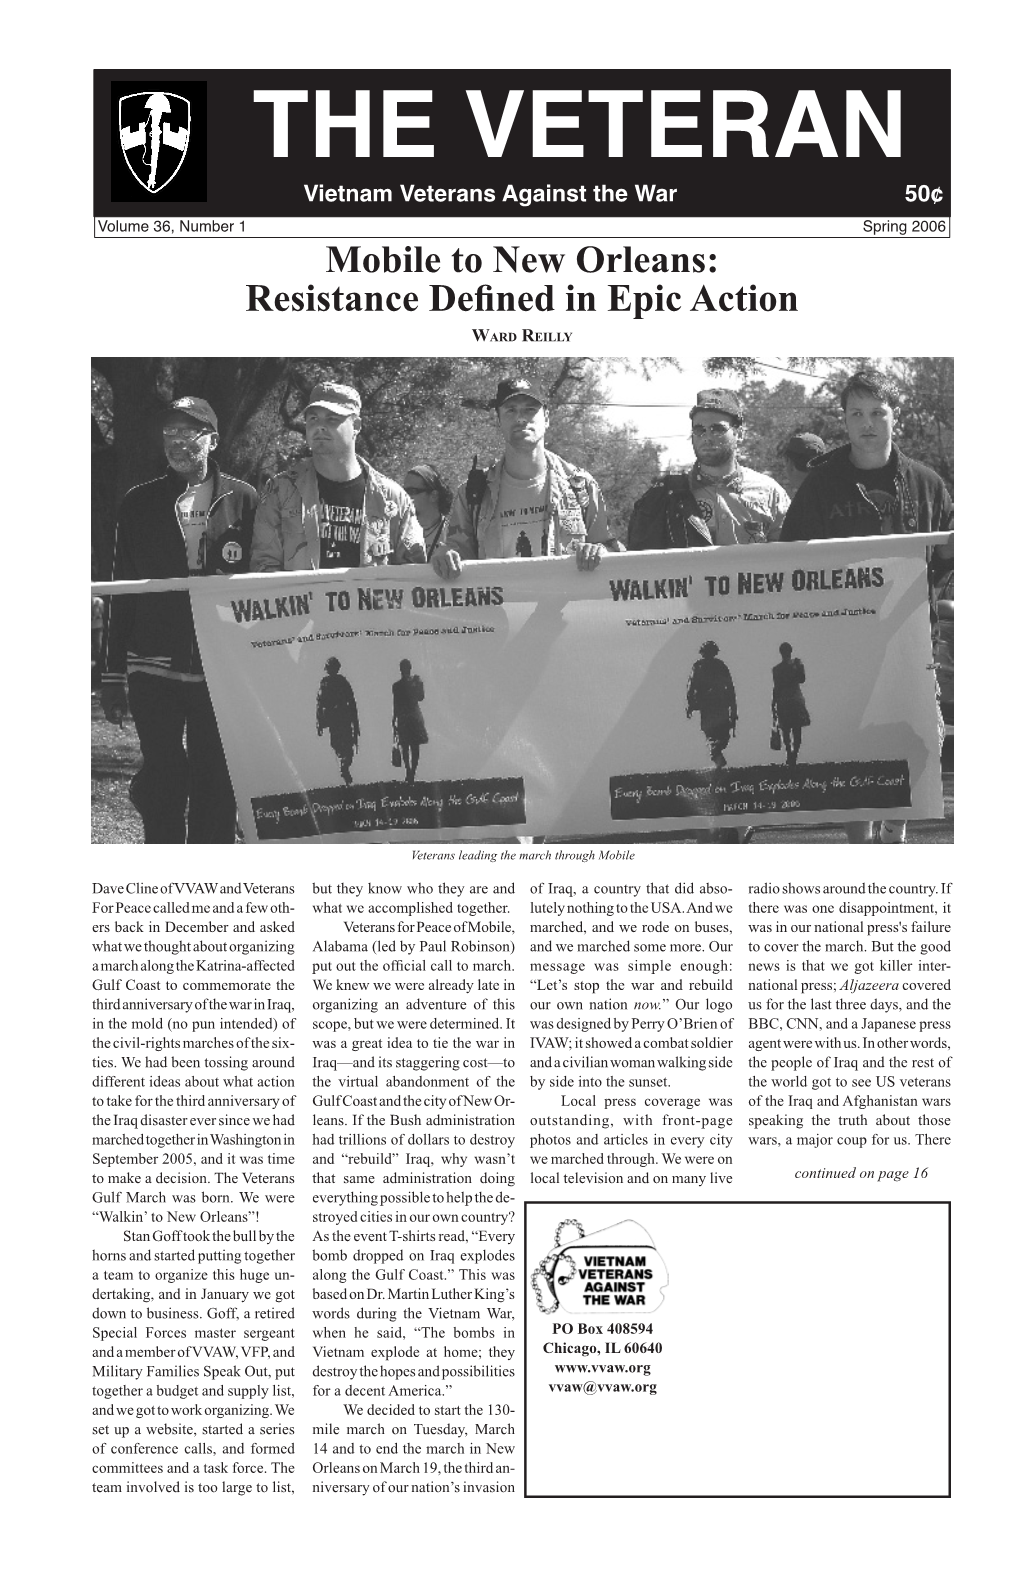 THE VETERAN Vietnam Veterans Against the War 50¢ Volume 36, Number 1 Spring 2006 Mobile to New Orleans: Resistance Defined in Epic Action Ward Reilly